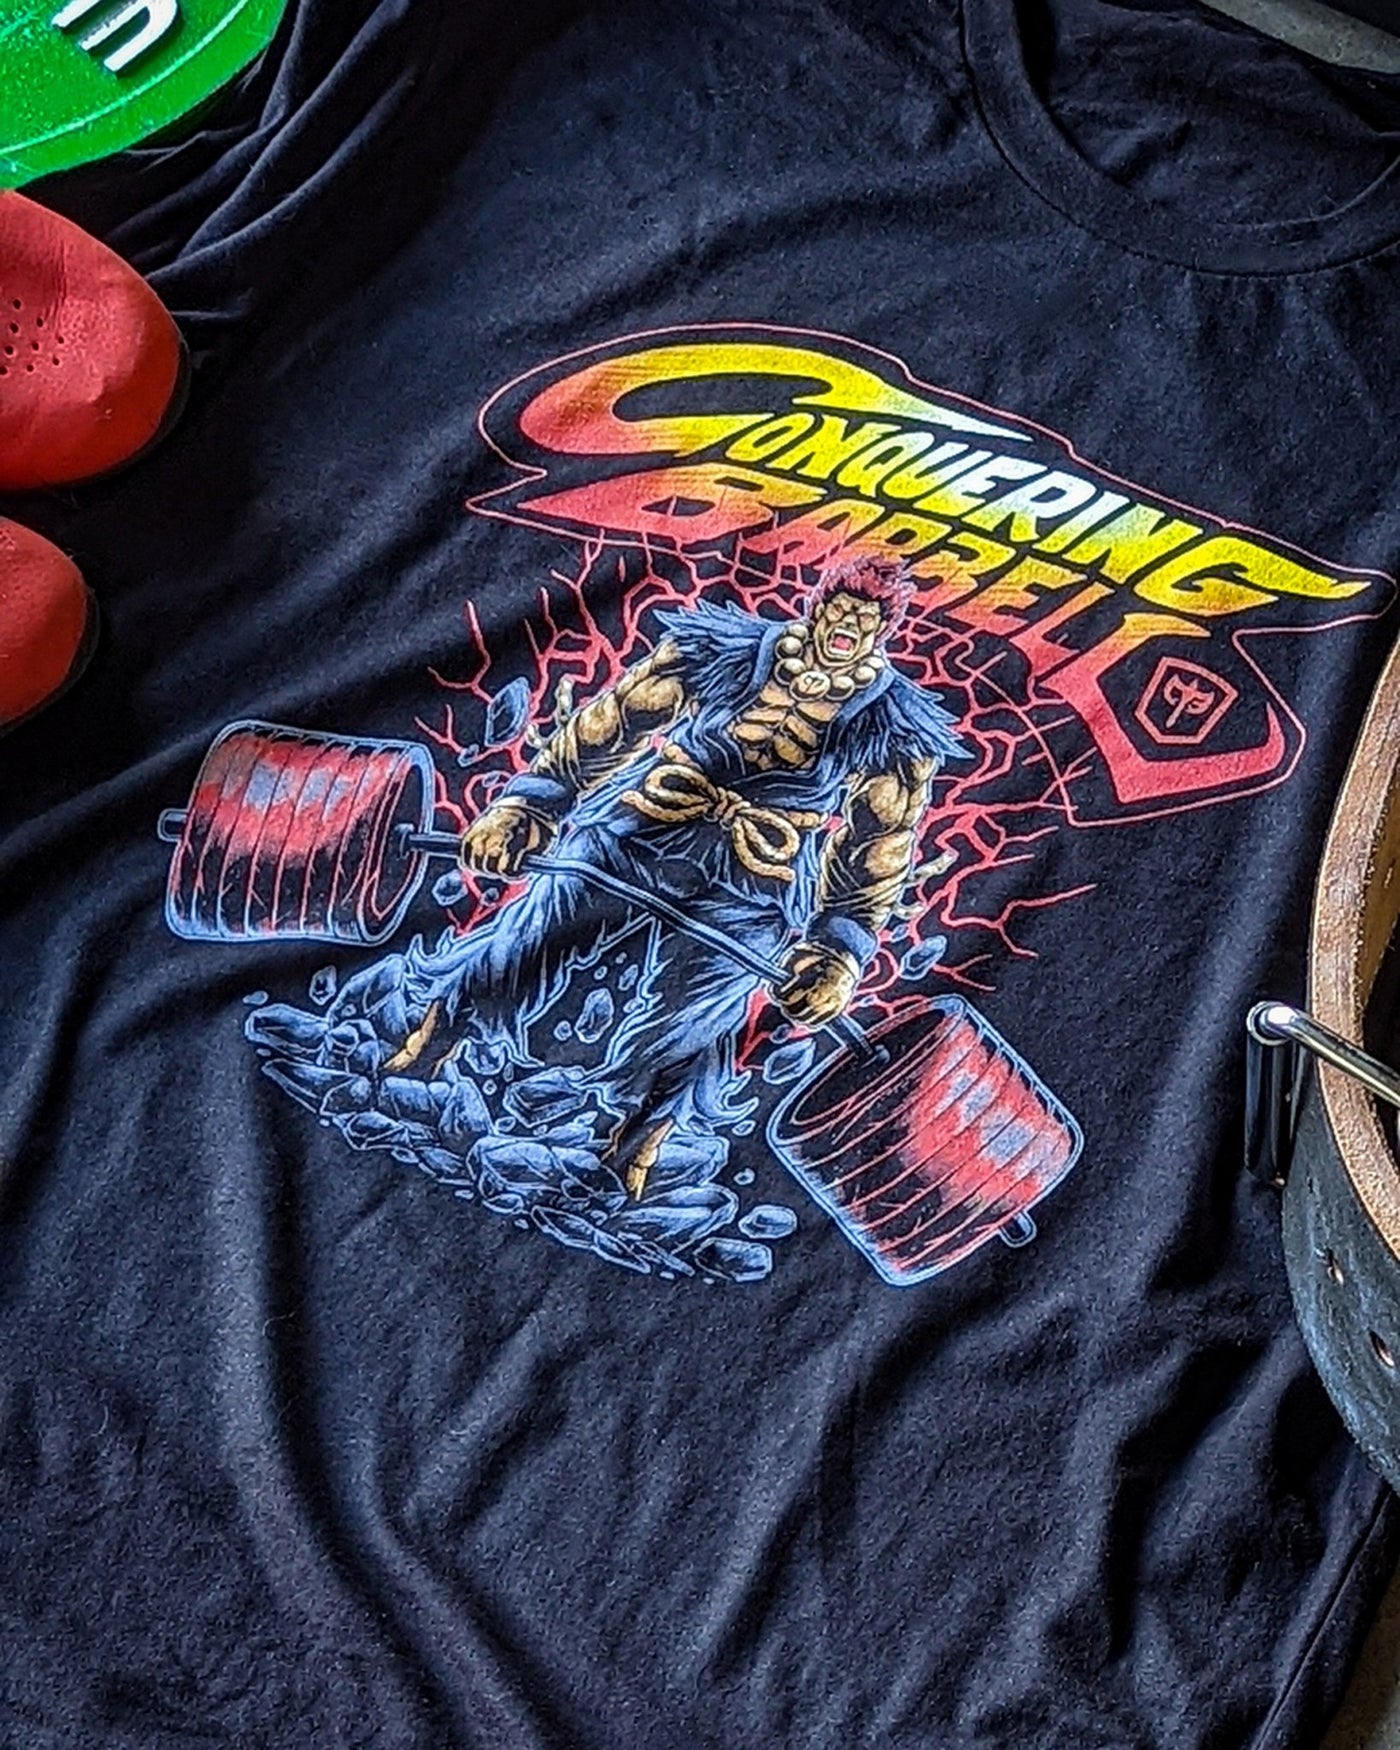 Raging Demon Tee - Conquering Barbell